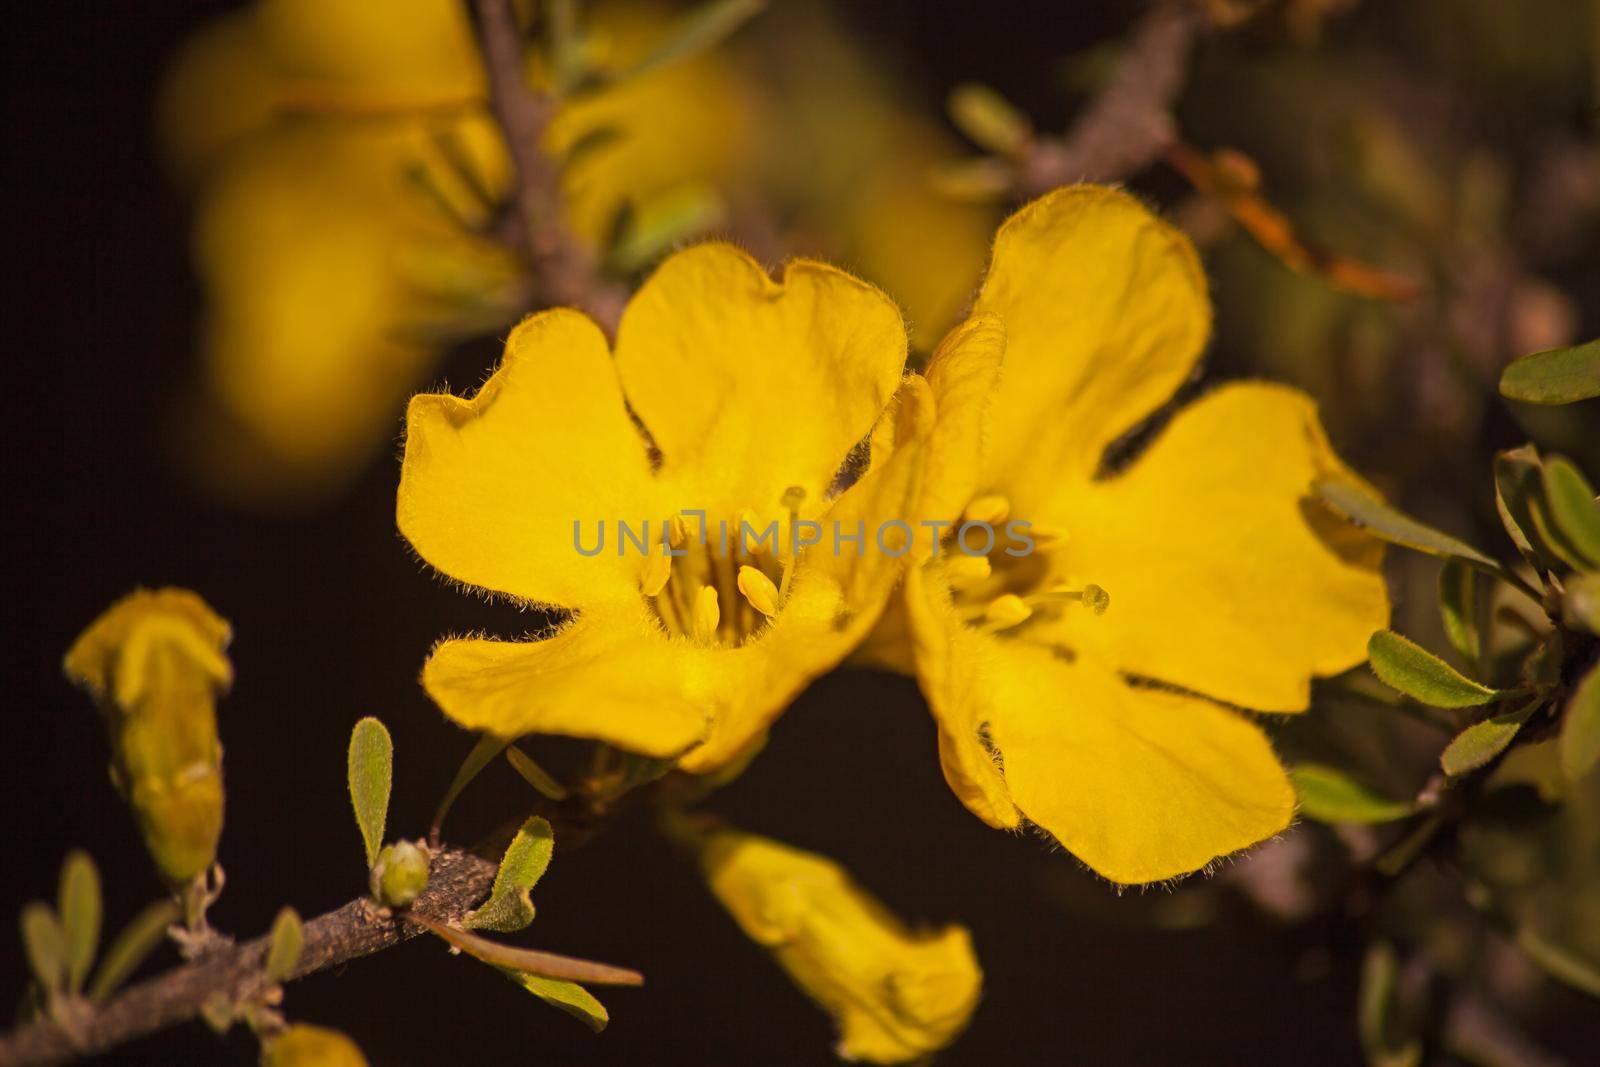 The Flowers of the Karoo Gold (Rhigozum obovatum Burch) is a drab looking spiny, multi branched shrub or small tree, but in springtime it is covered in these bright golden-yellow flowers